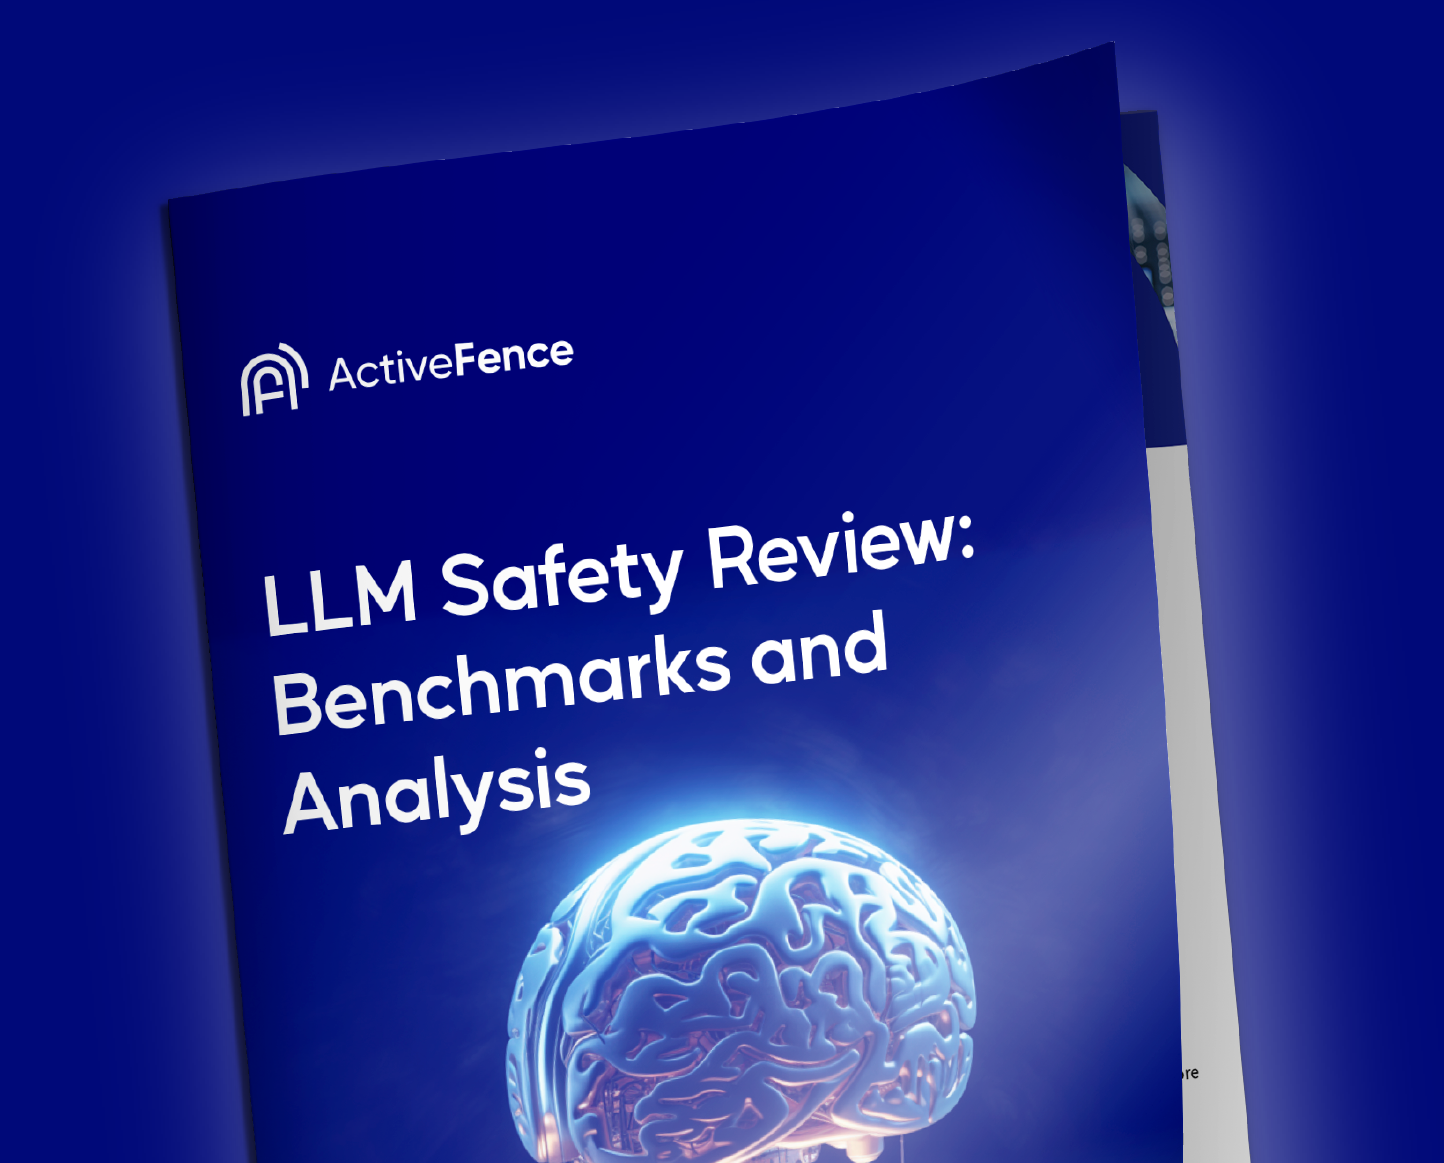 ActiveFence LLM Safety Review Report Cover featuring a stylized brain on a blue background.